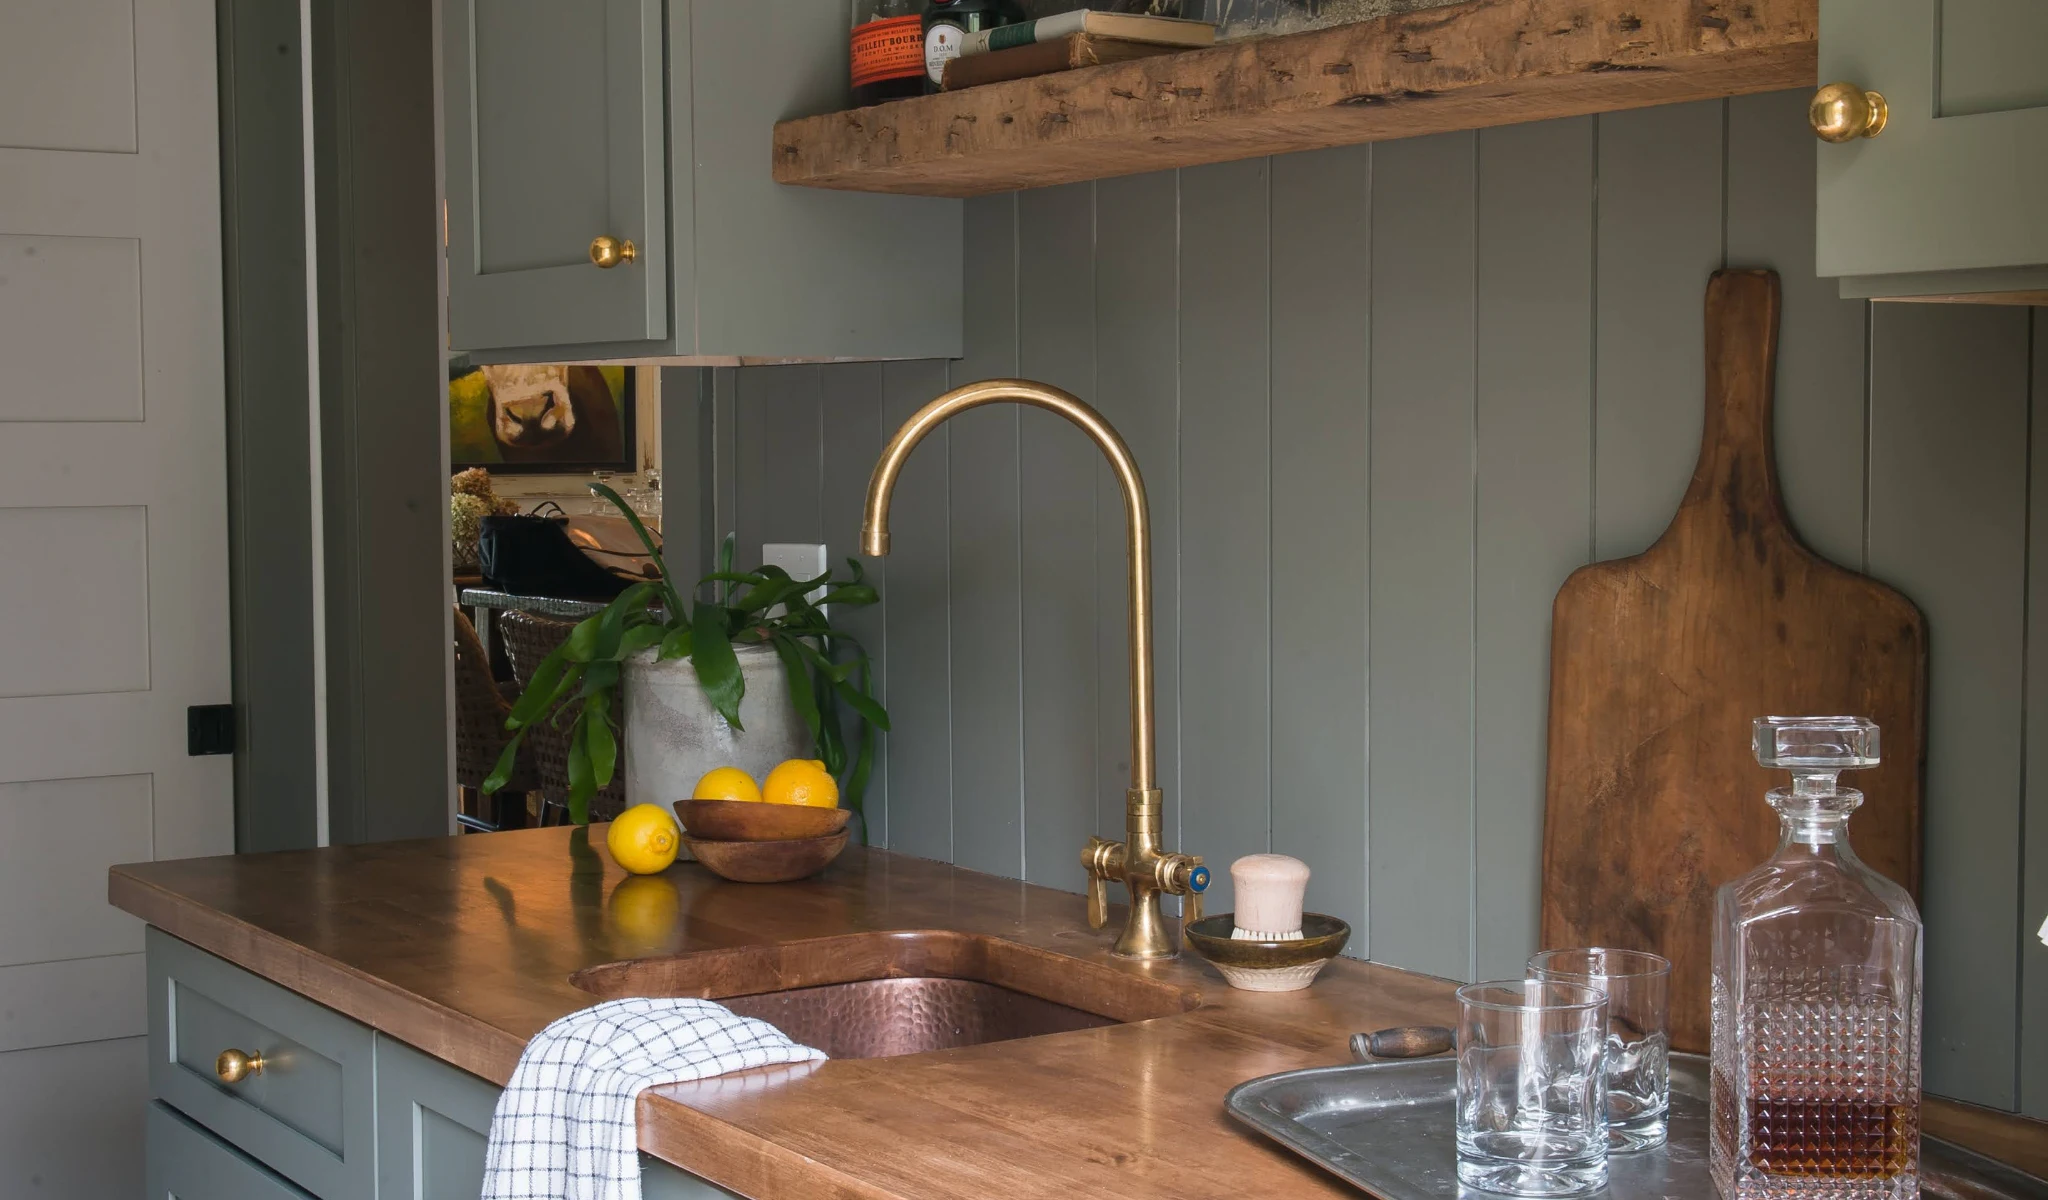 A kitchen with a wooden counter top and sink, the results of a home renovation.